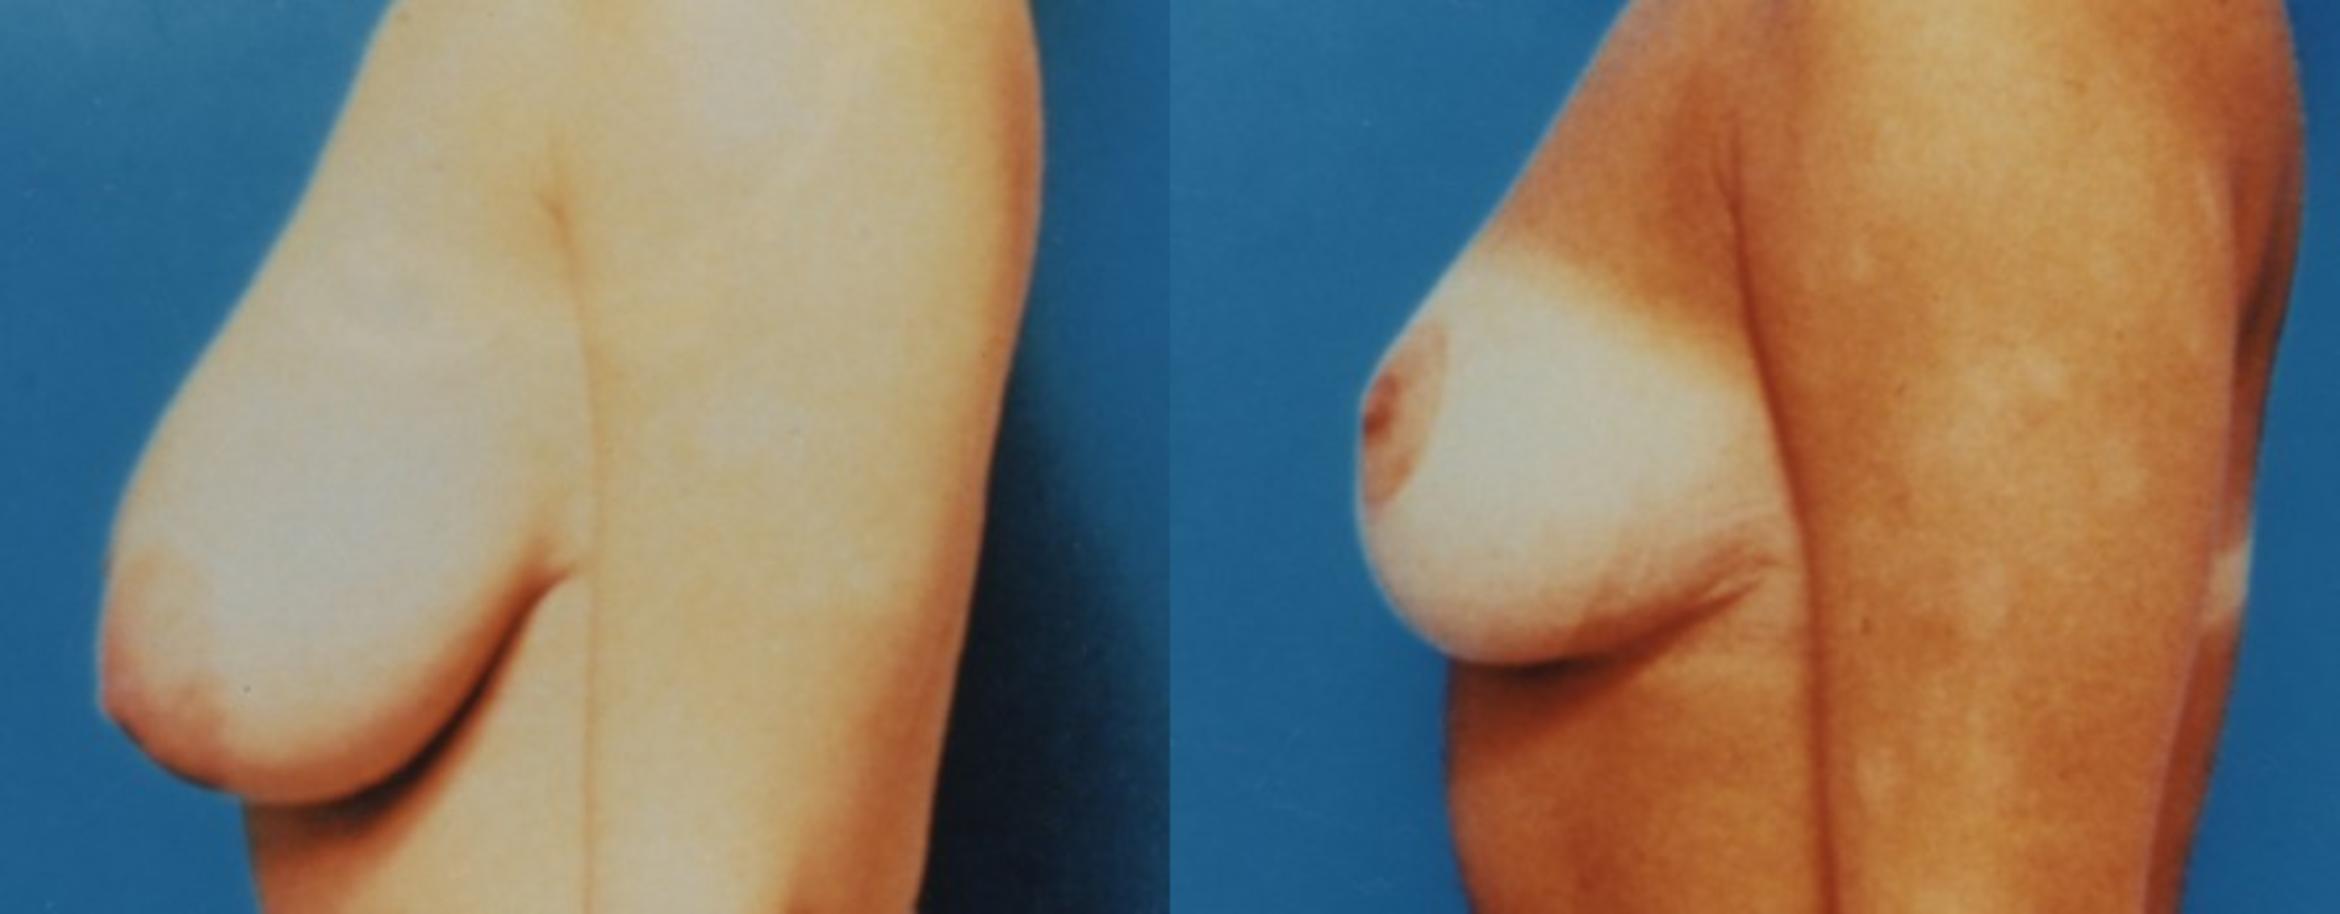 Breast Reduction Before & After Photo | New Jersey & Pennsylvania,  | The Derm Group